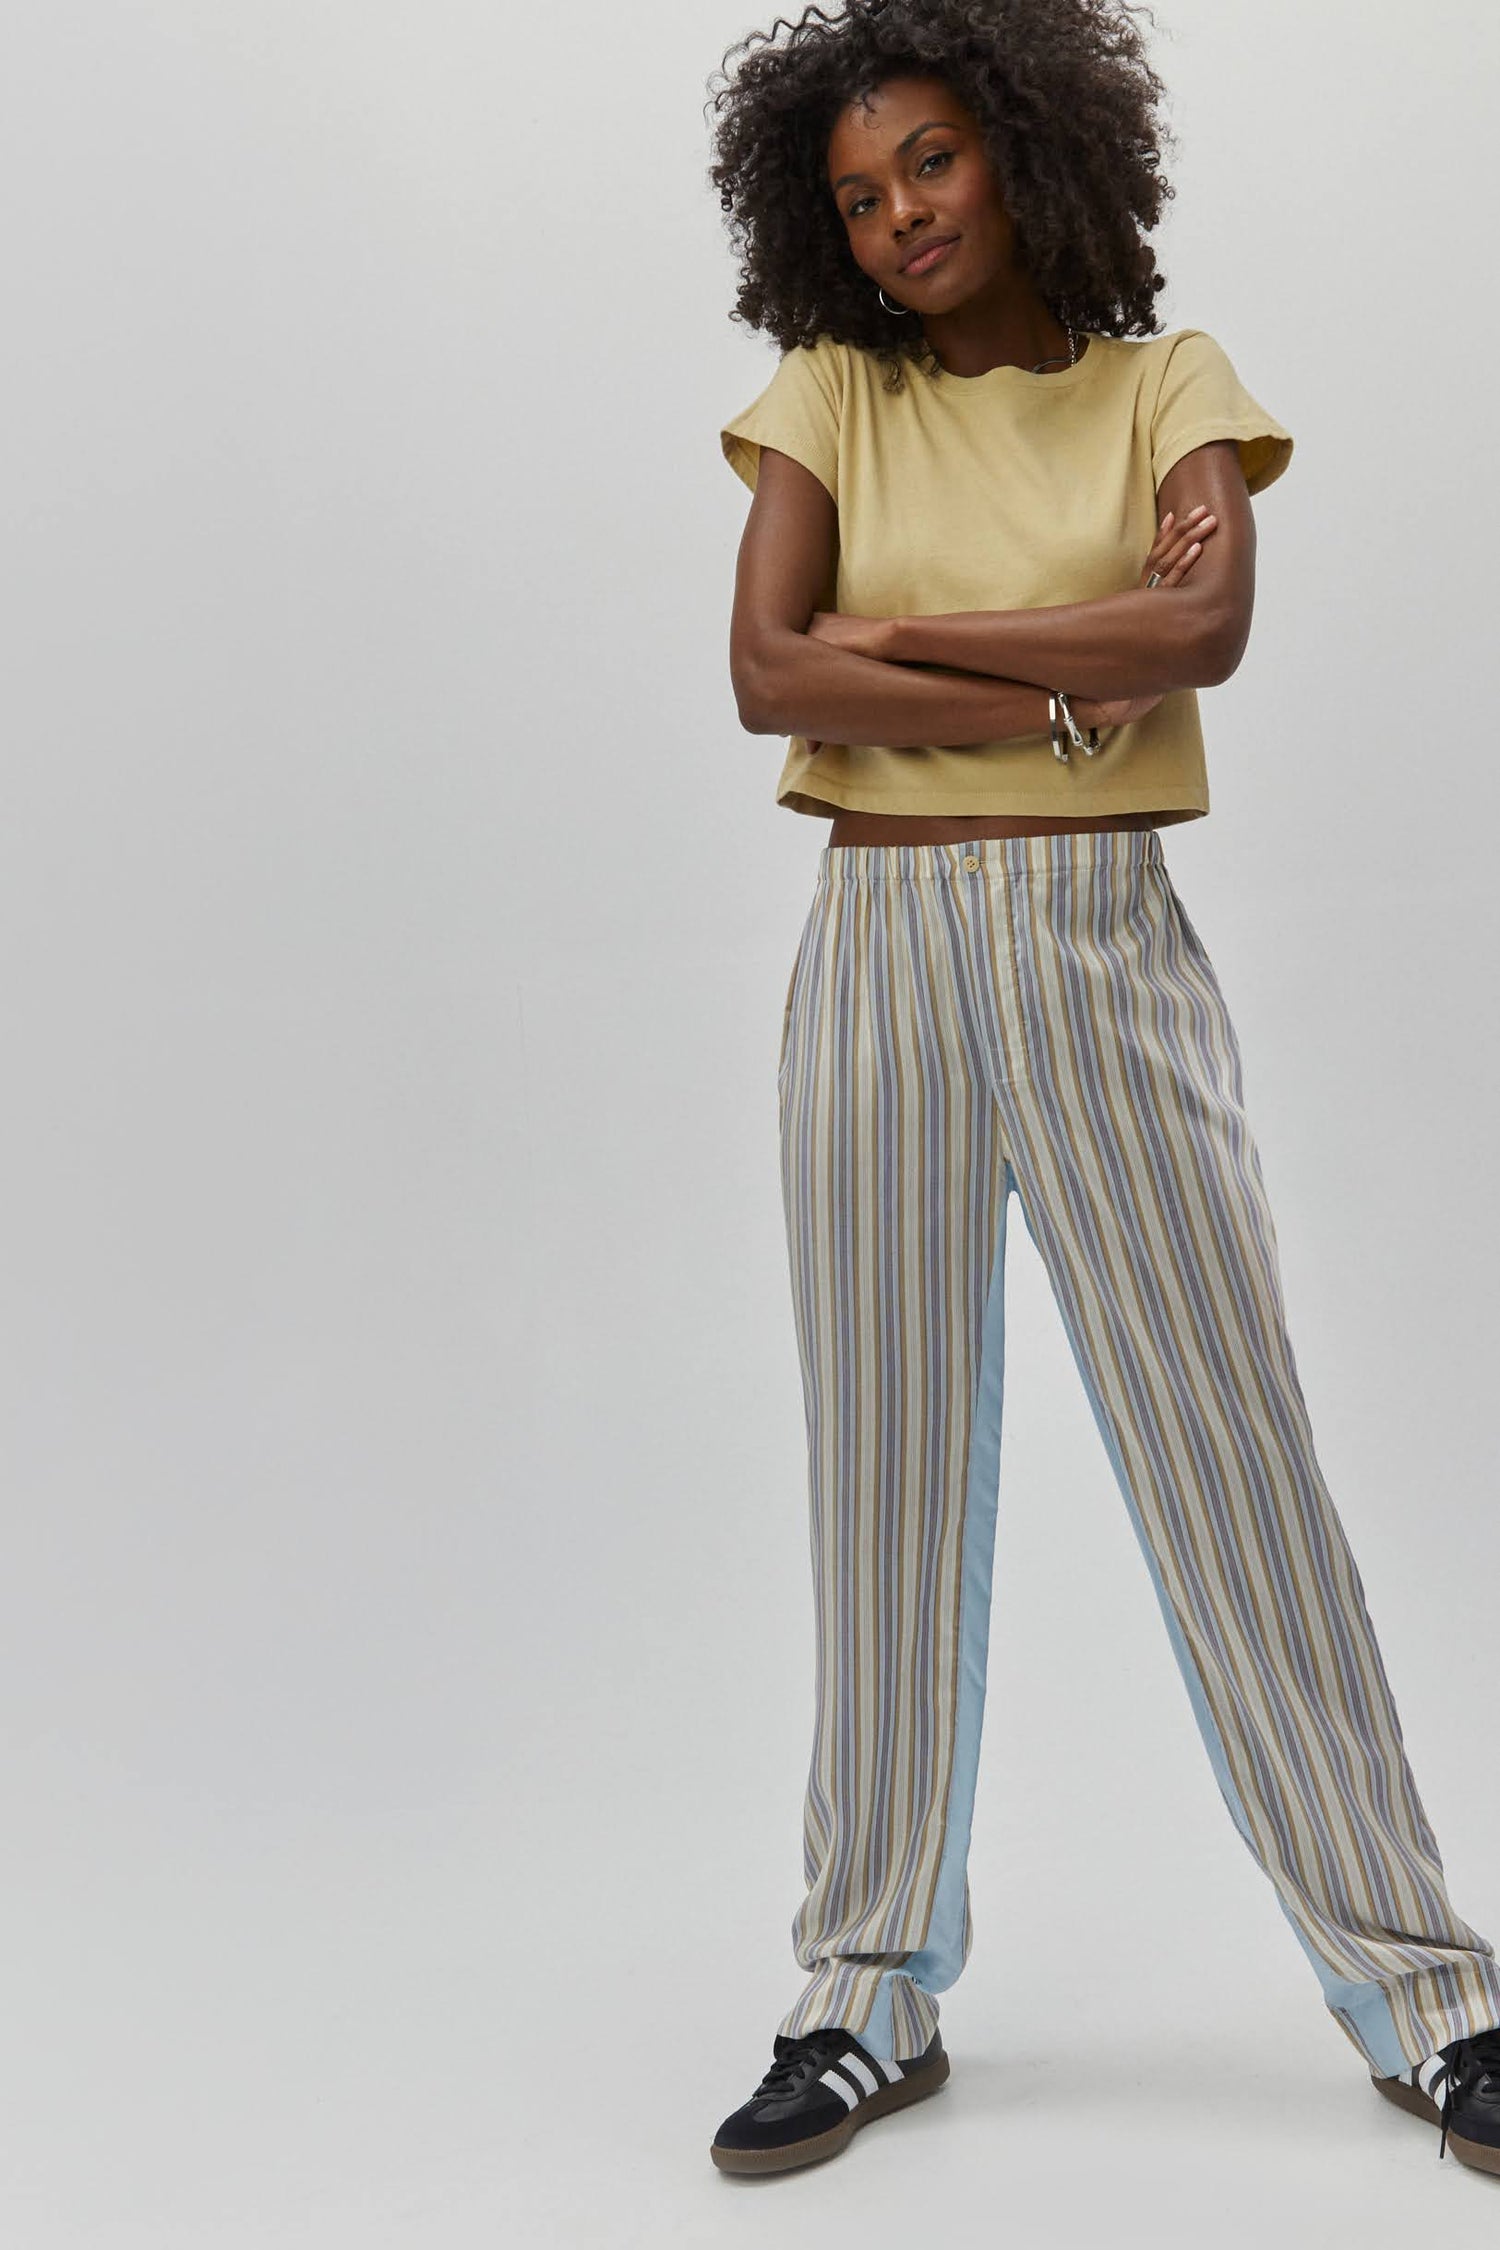 Curly haired model wearing a khaki crop tee and striped trousers.